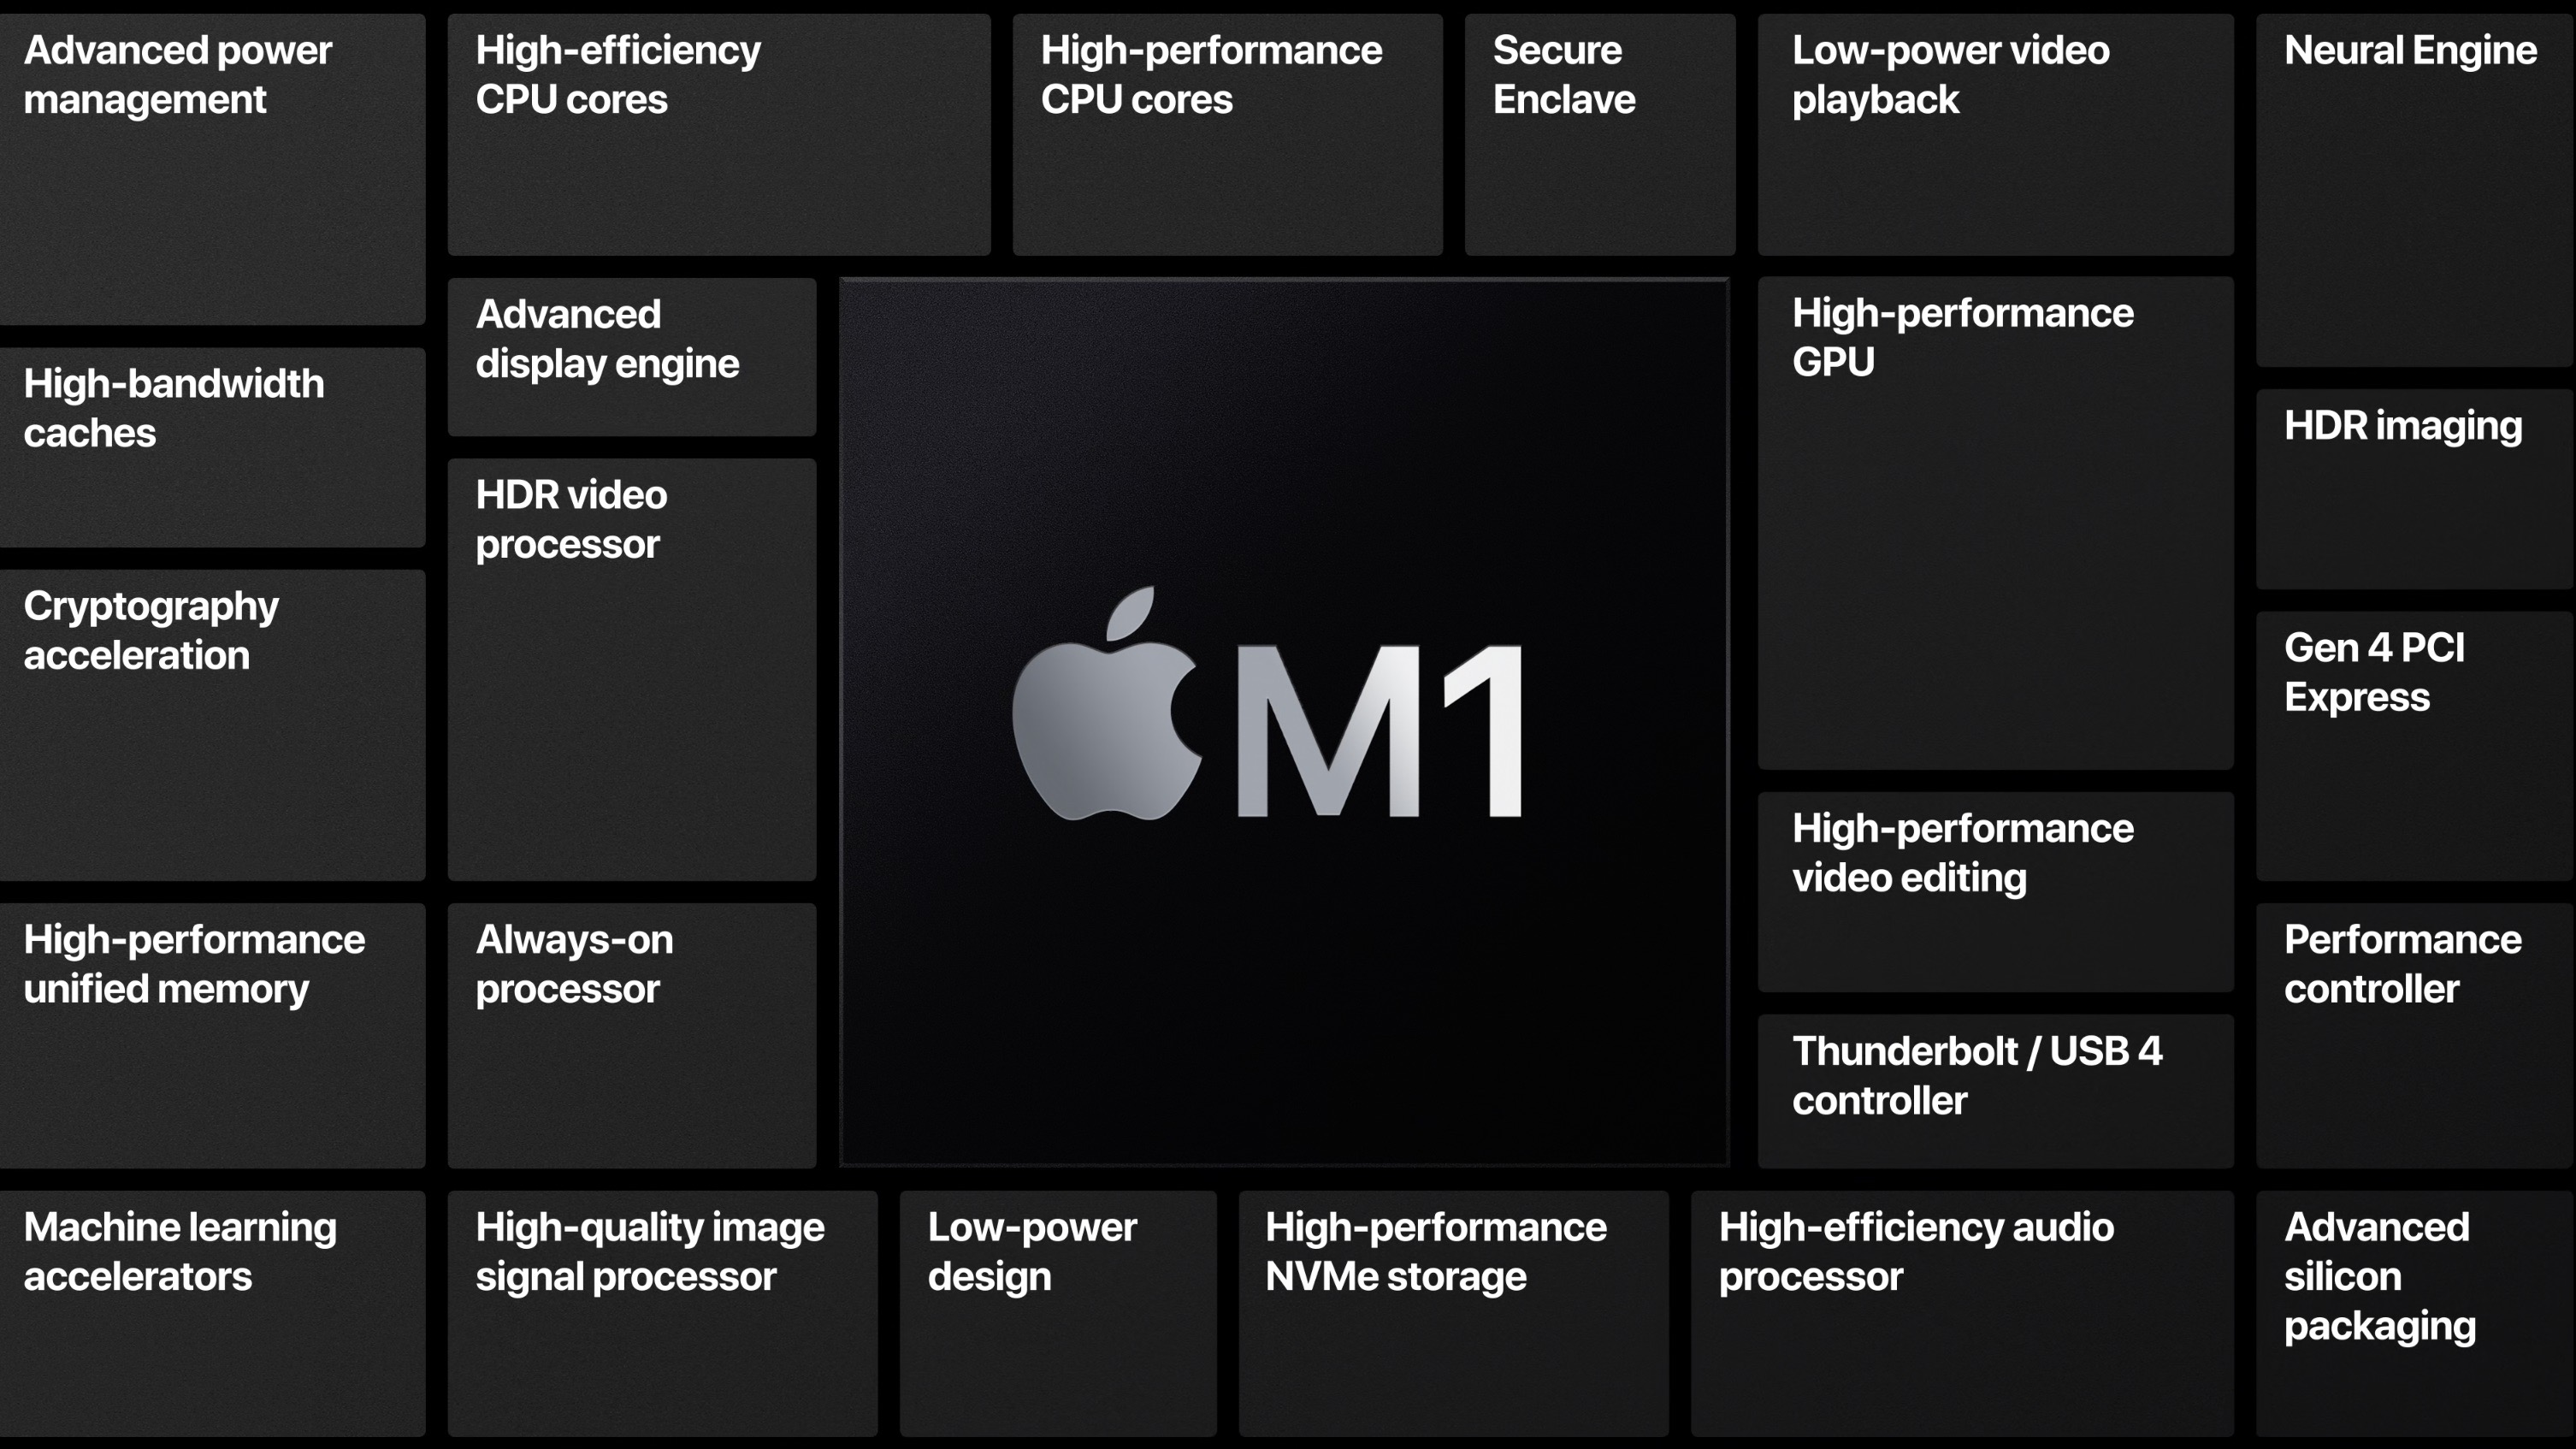 MacBook Air with M1 chip beats 16-inch MacBook Pro performance in benchmark  test - 9to5Mac